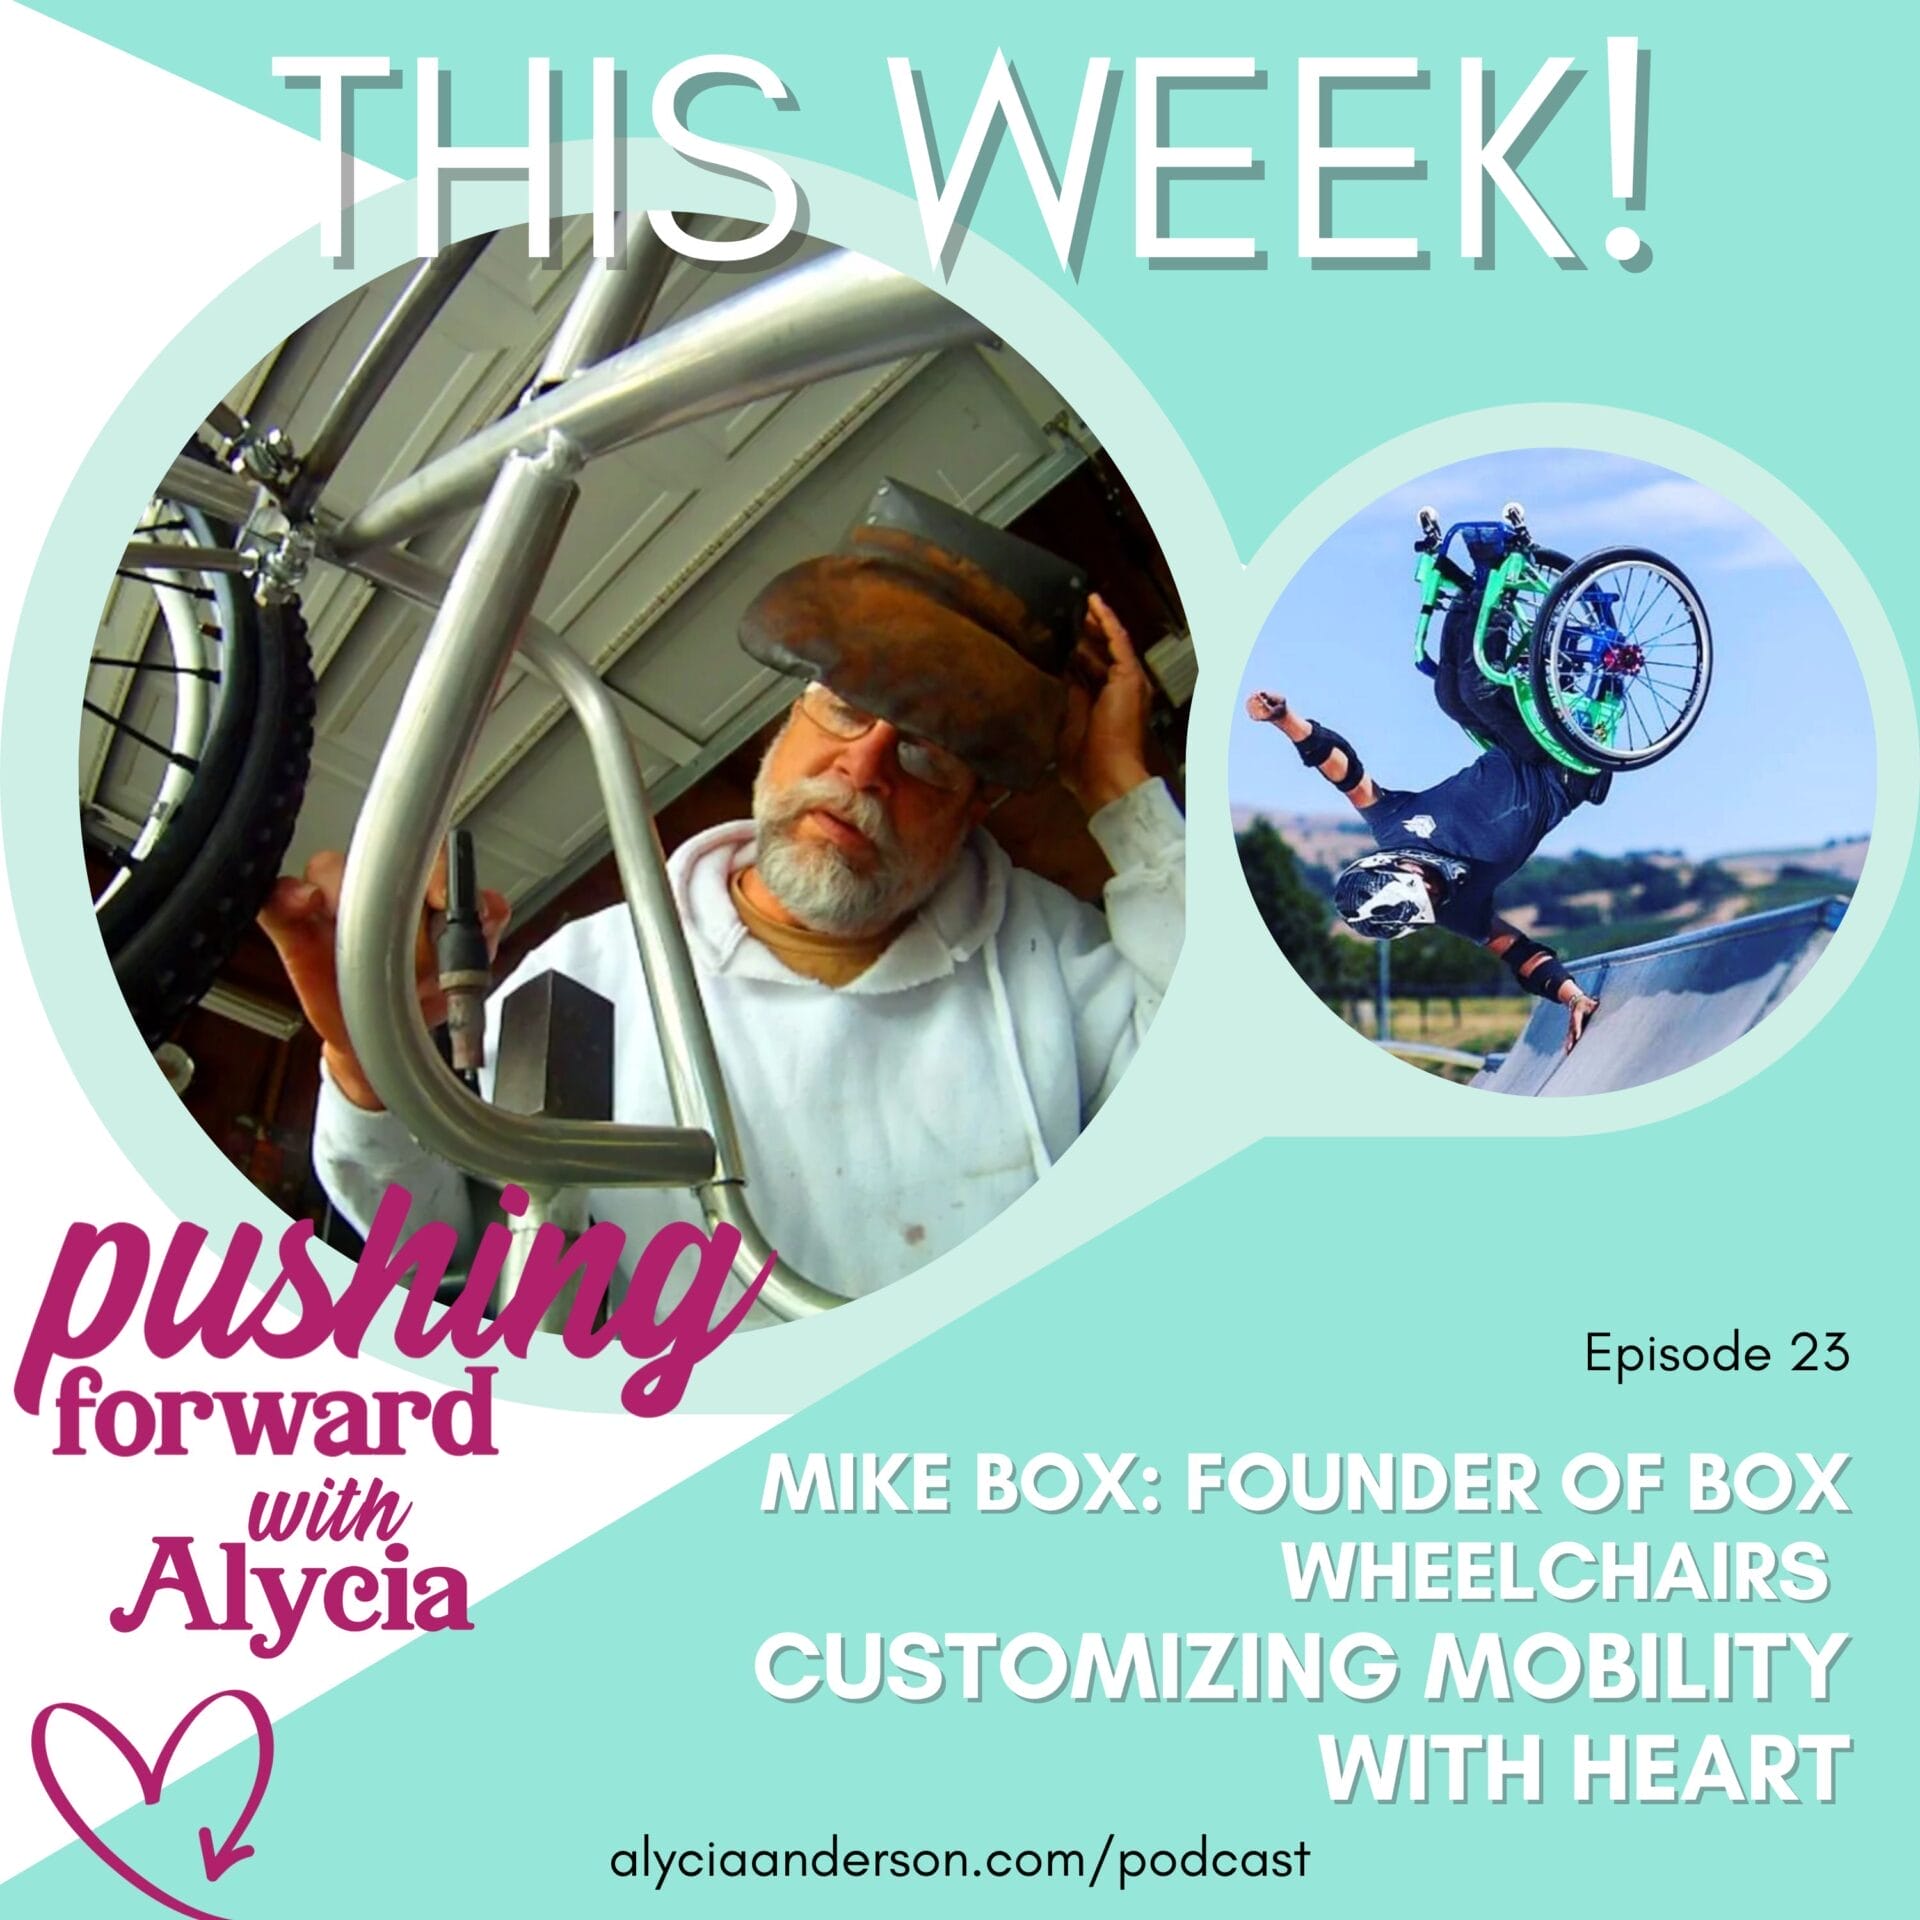 mike box founder of box wheelchairs shares his story on pushing forward with alycia episode twenty three